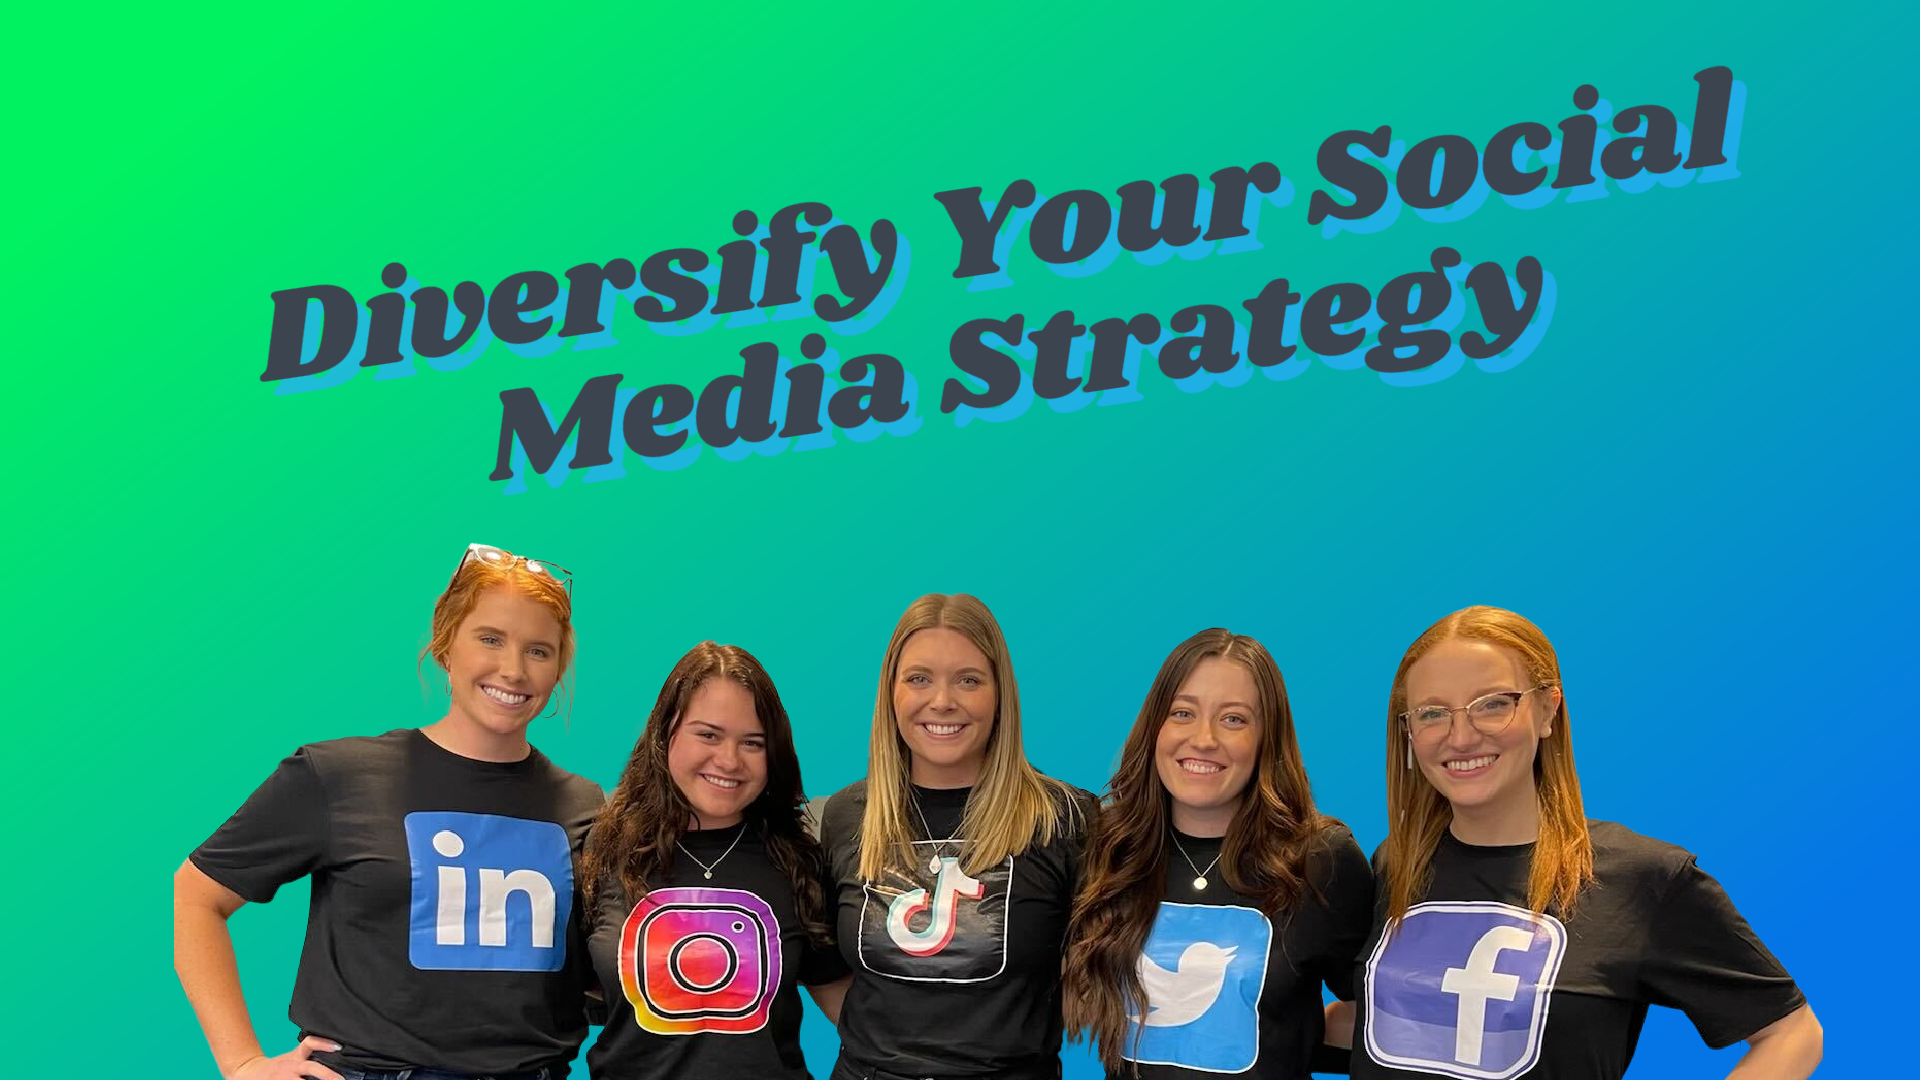 Diversify Your Social Media Strategy